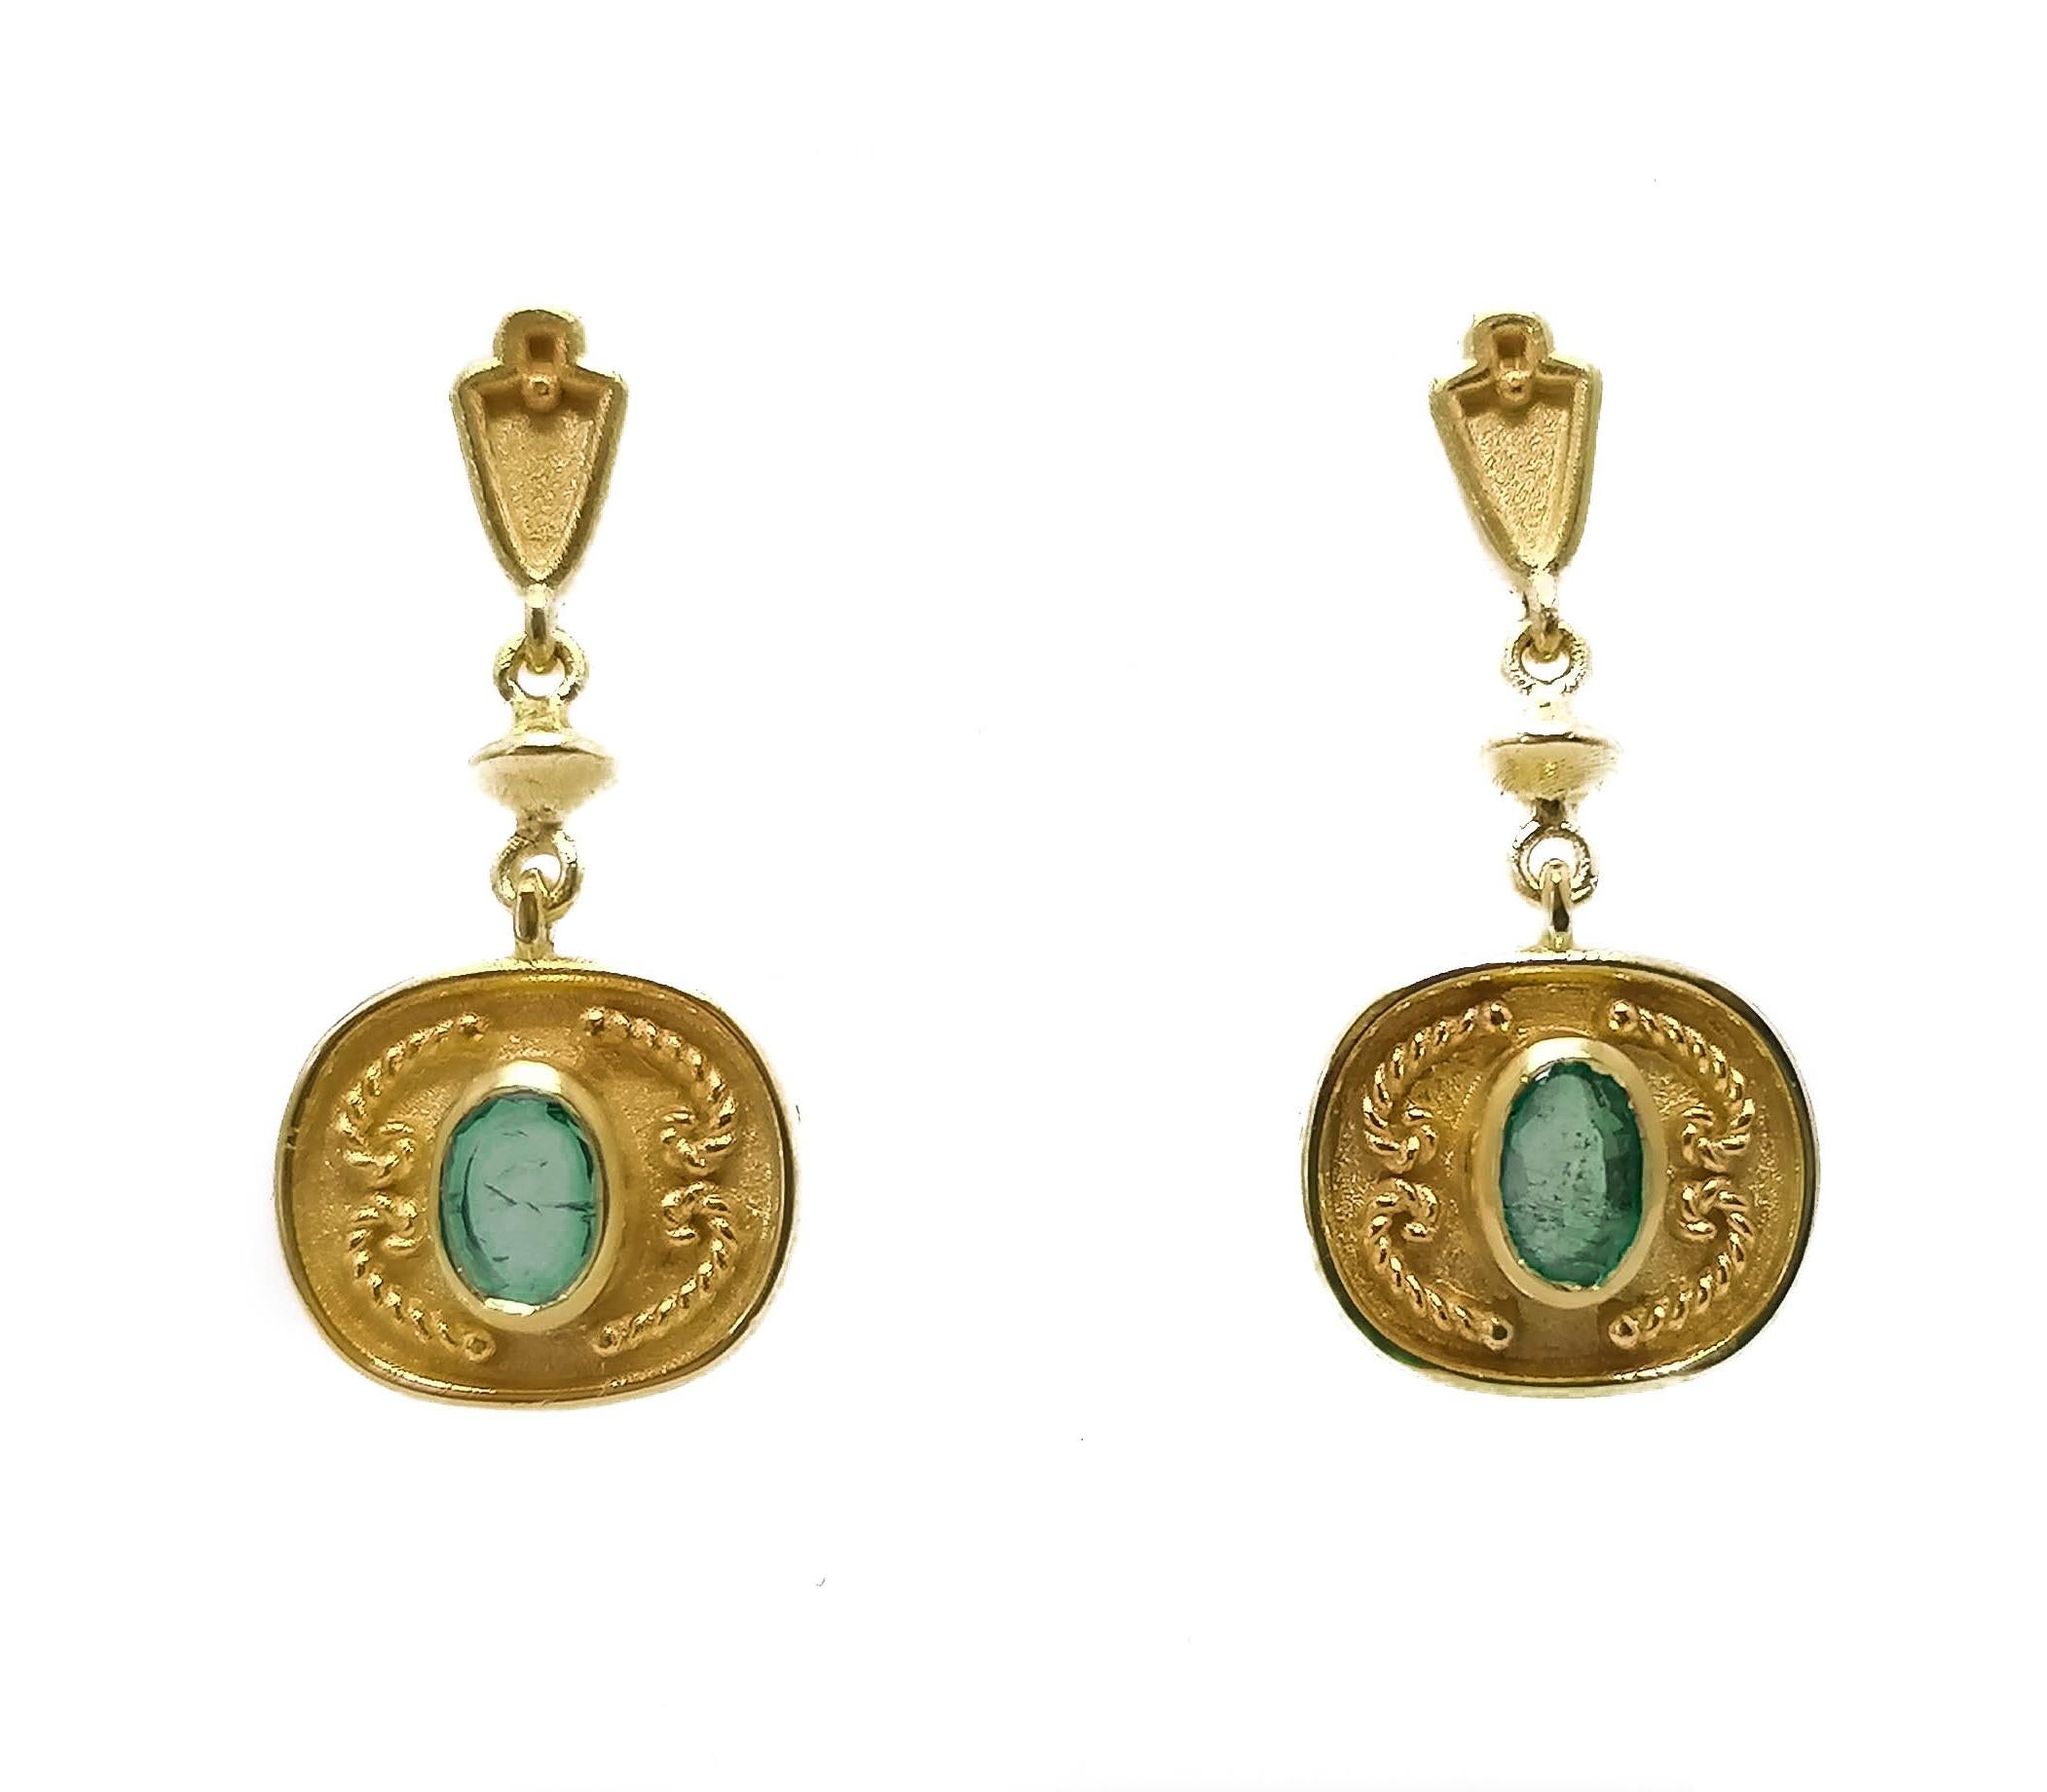 These S.Georgios designer earrings are hand made from 18 Karat Yellow Gold and decorated with Etruscan-style bead granulation workmanship done all microscopically. These beautiful earrings feature 2 oval-cut natural Emeralds a total weight of 0.82